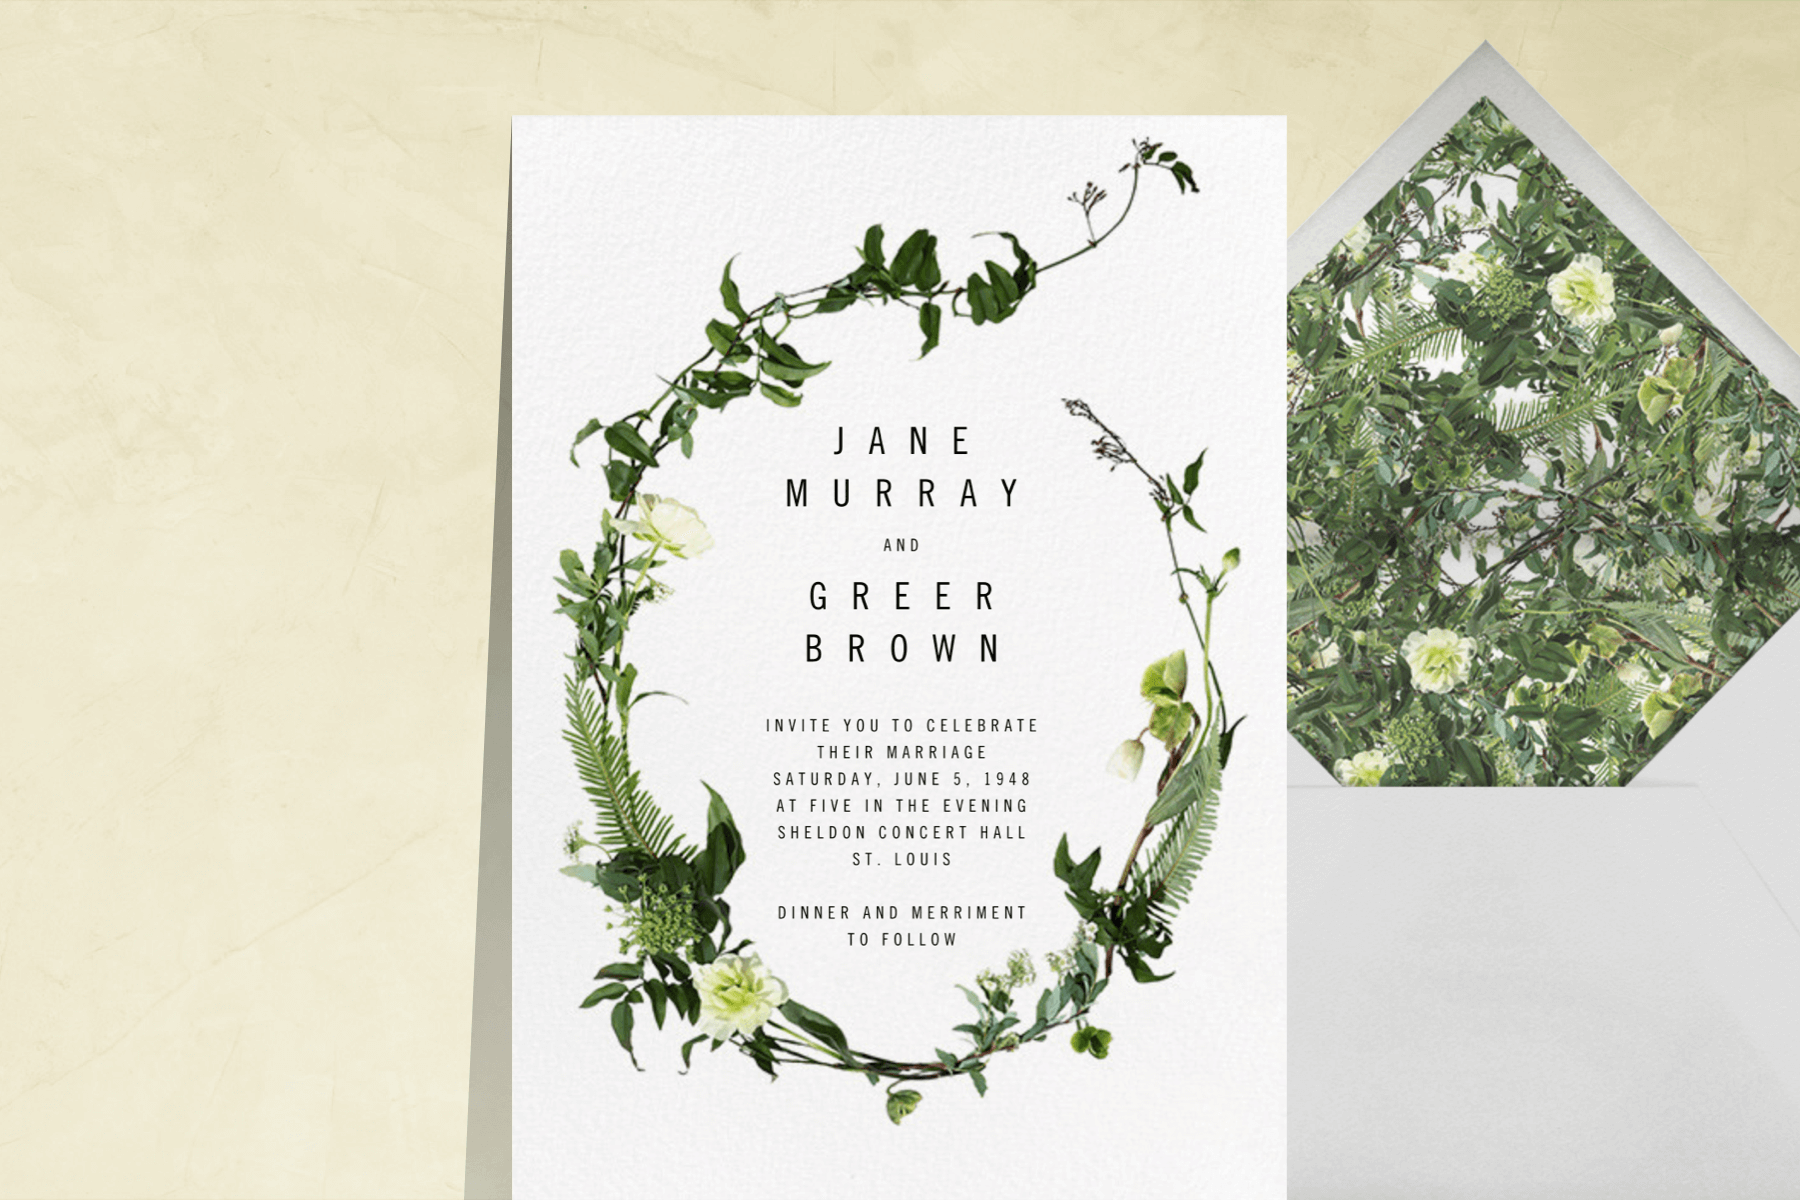 A white wedding invitation with a swoosh of greenery and florals around the text.